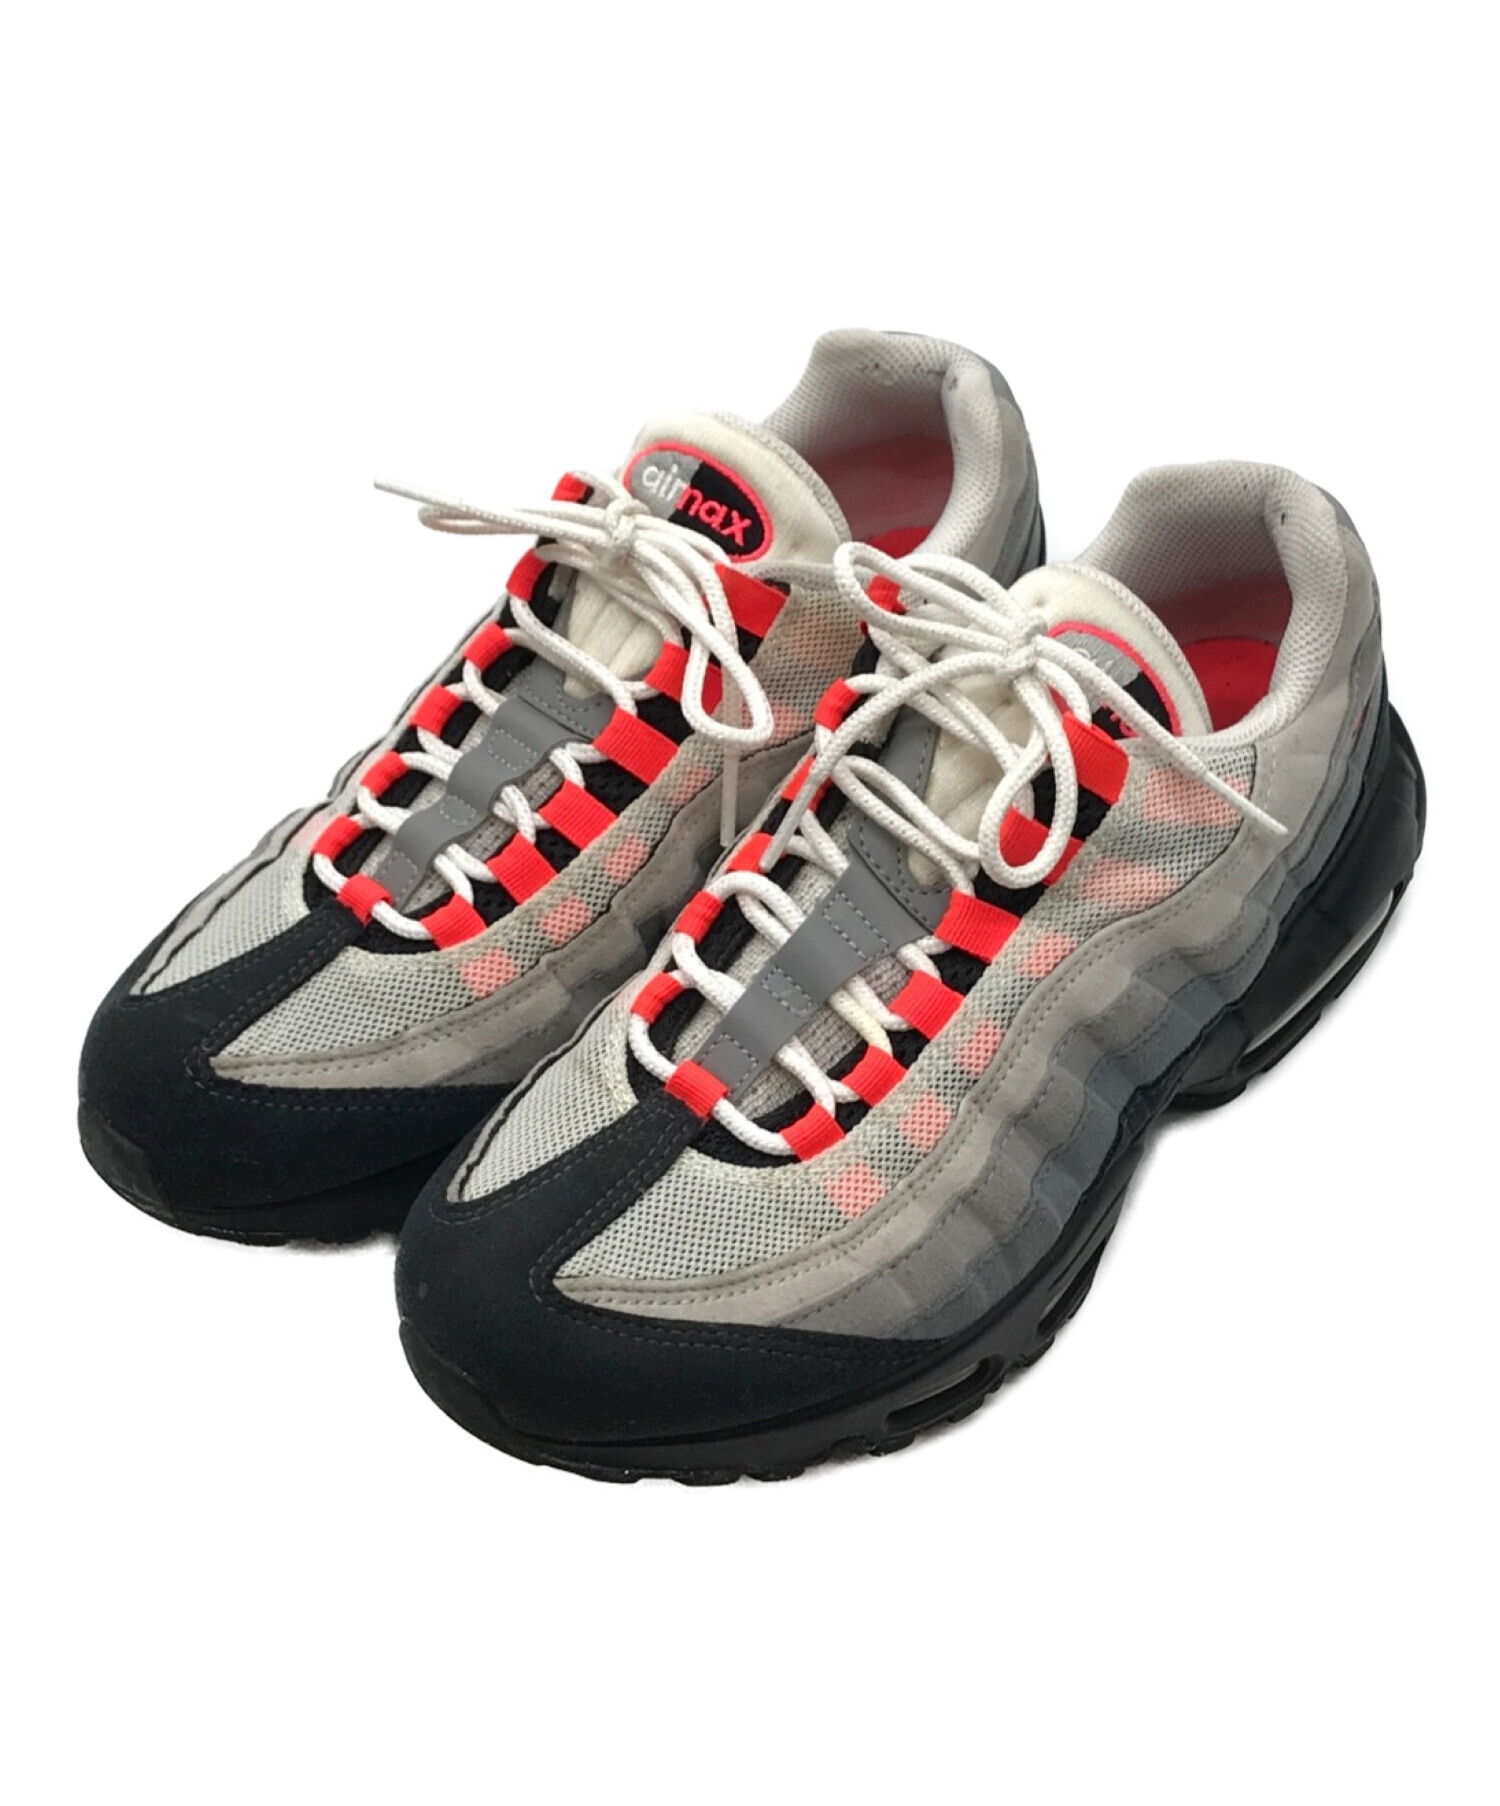 NIKE AIR MAX 95 WHITE/SOLAR RED ソーラーレッド